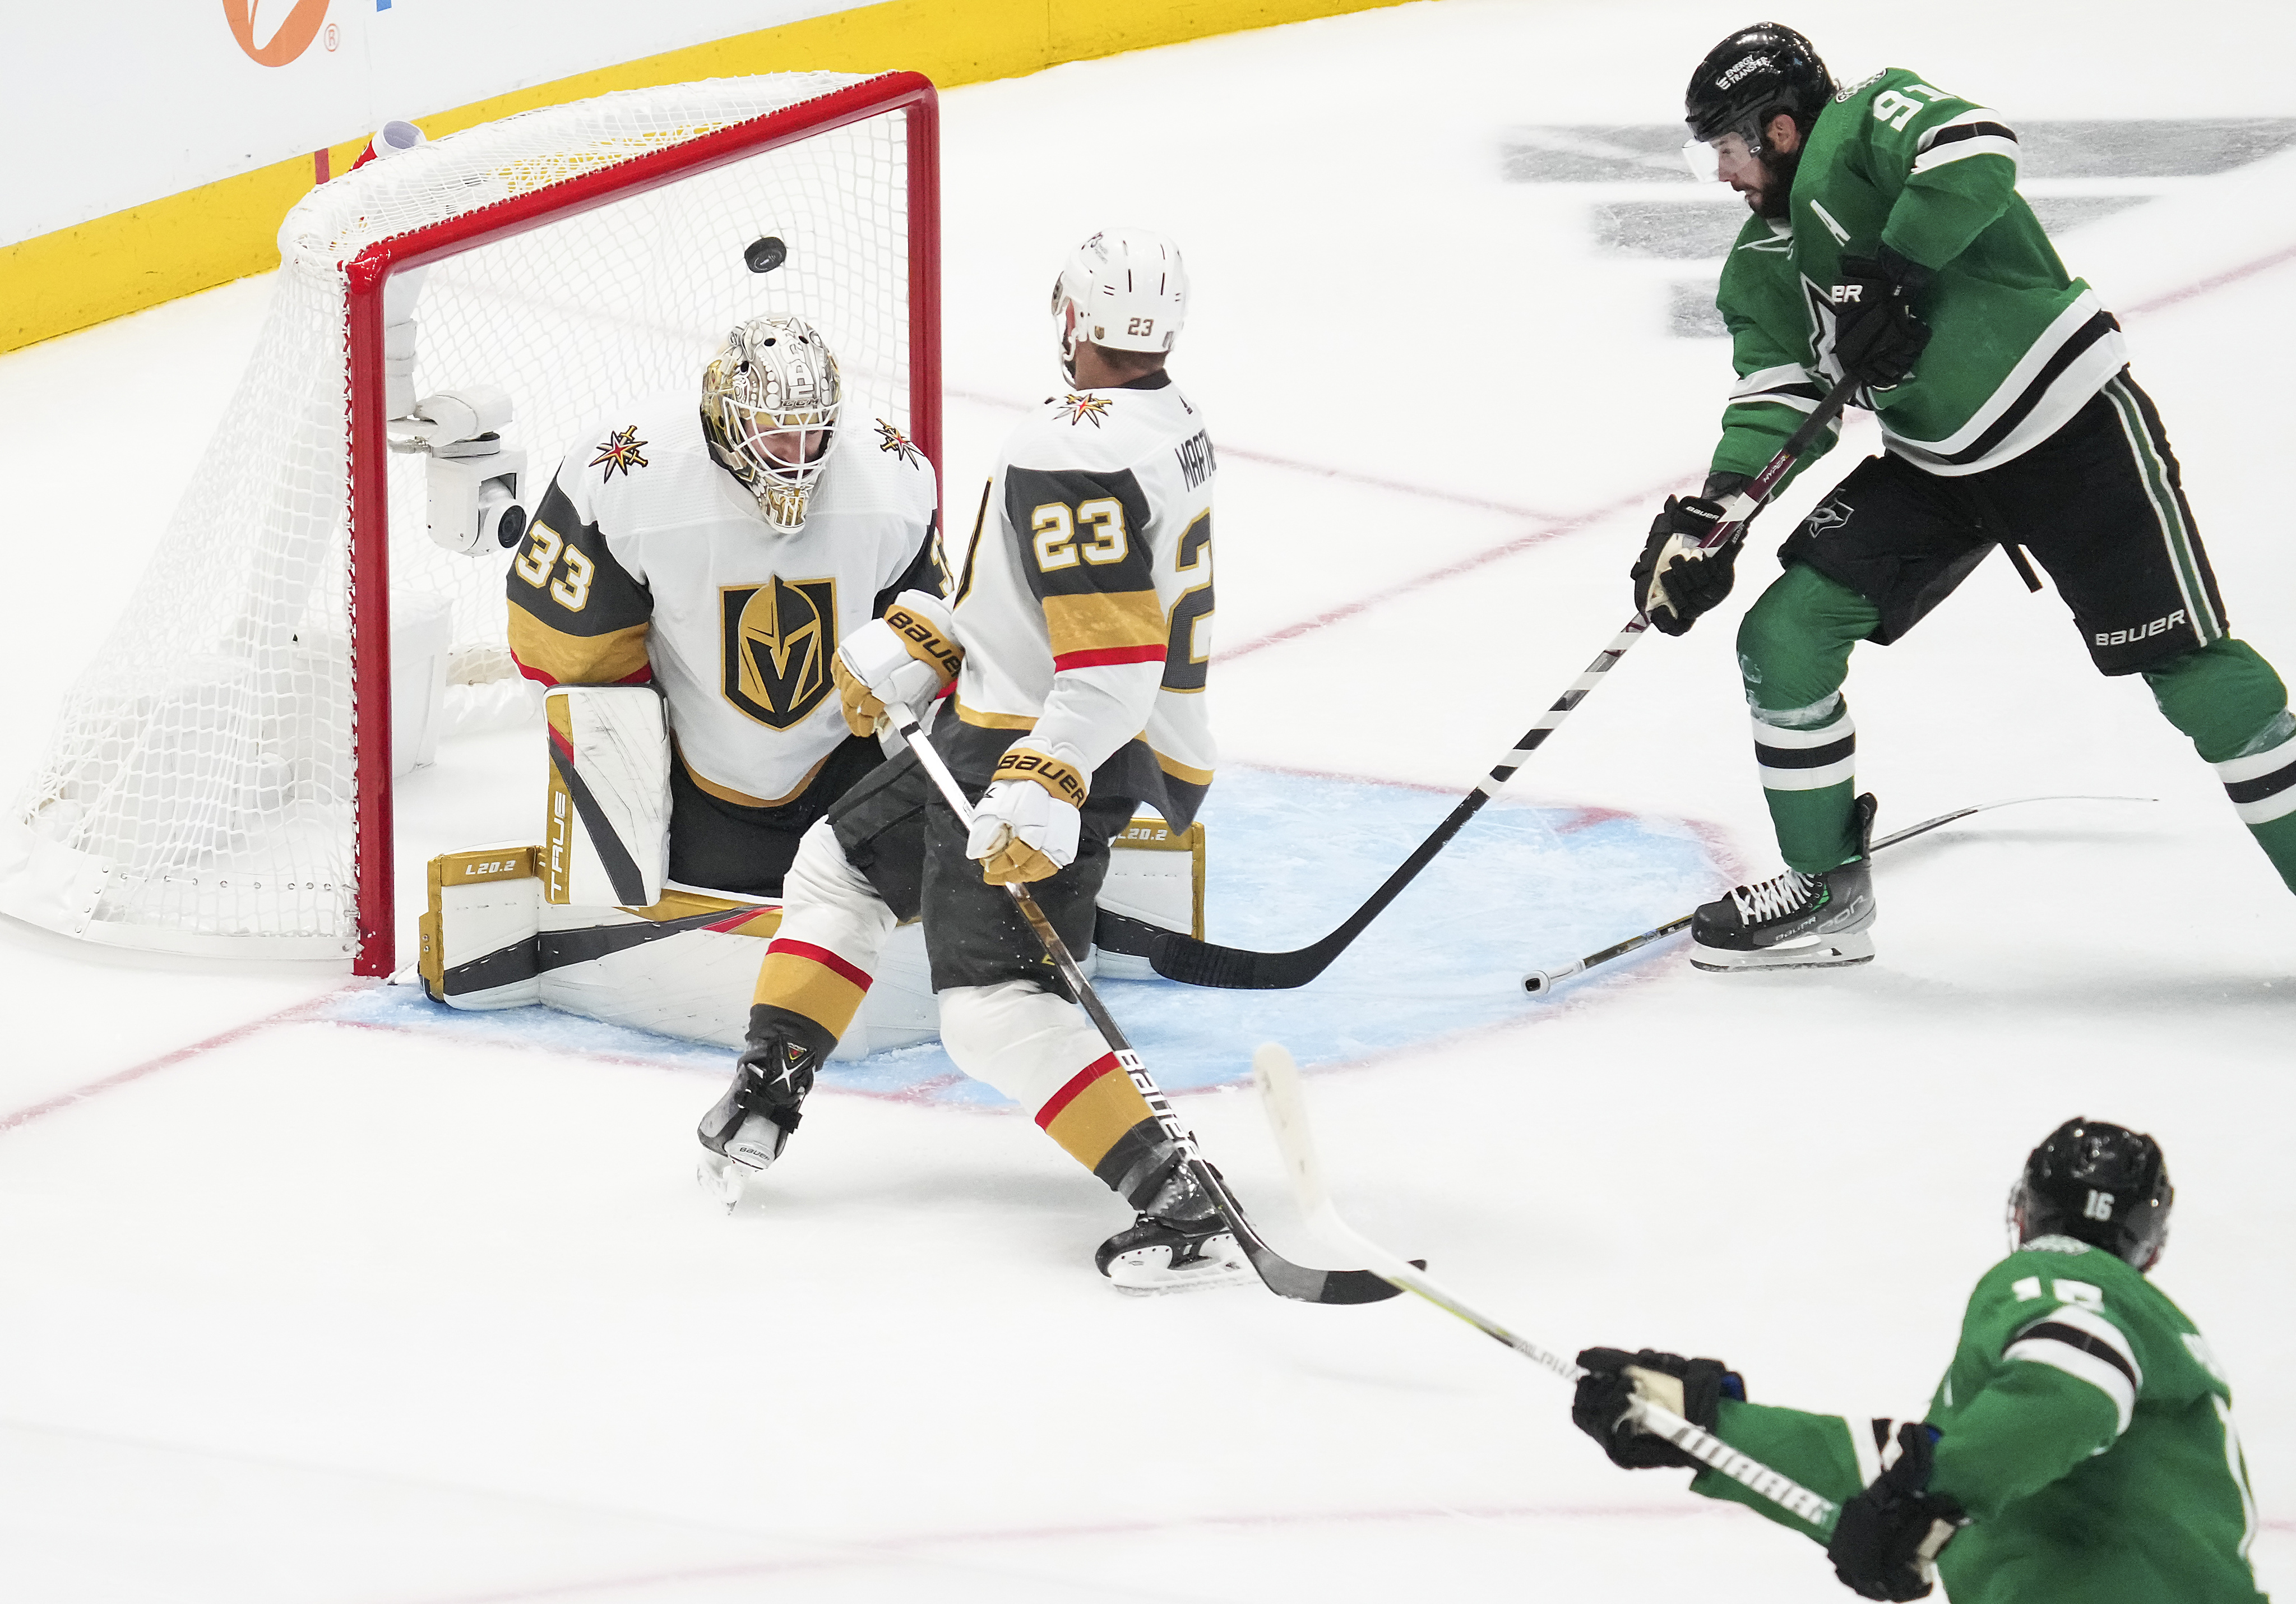 Golden Knights-Stars schedule: Full list of dates, start times for